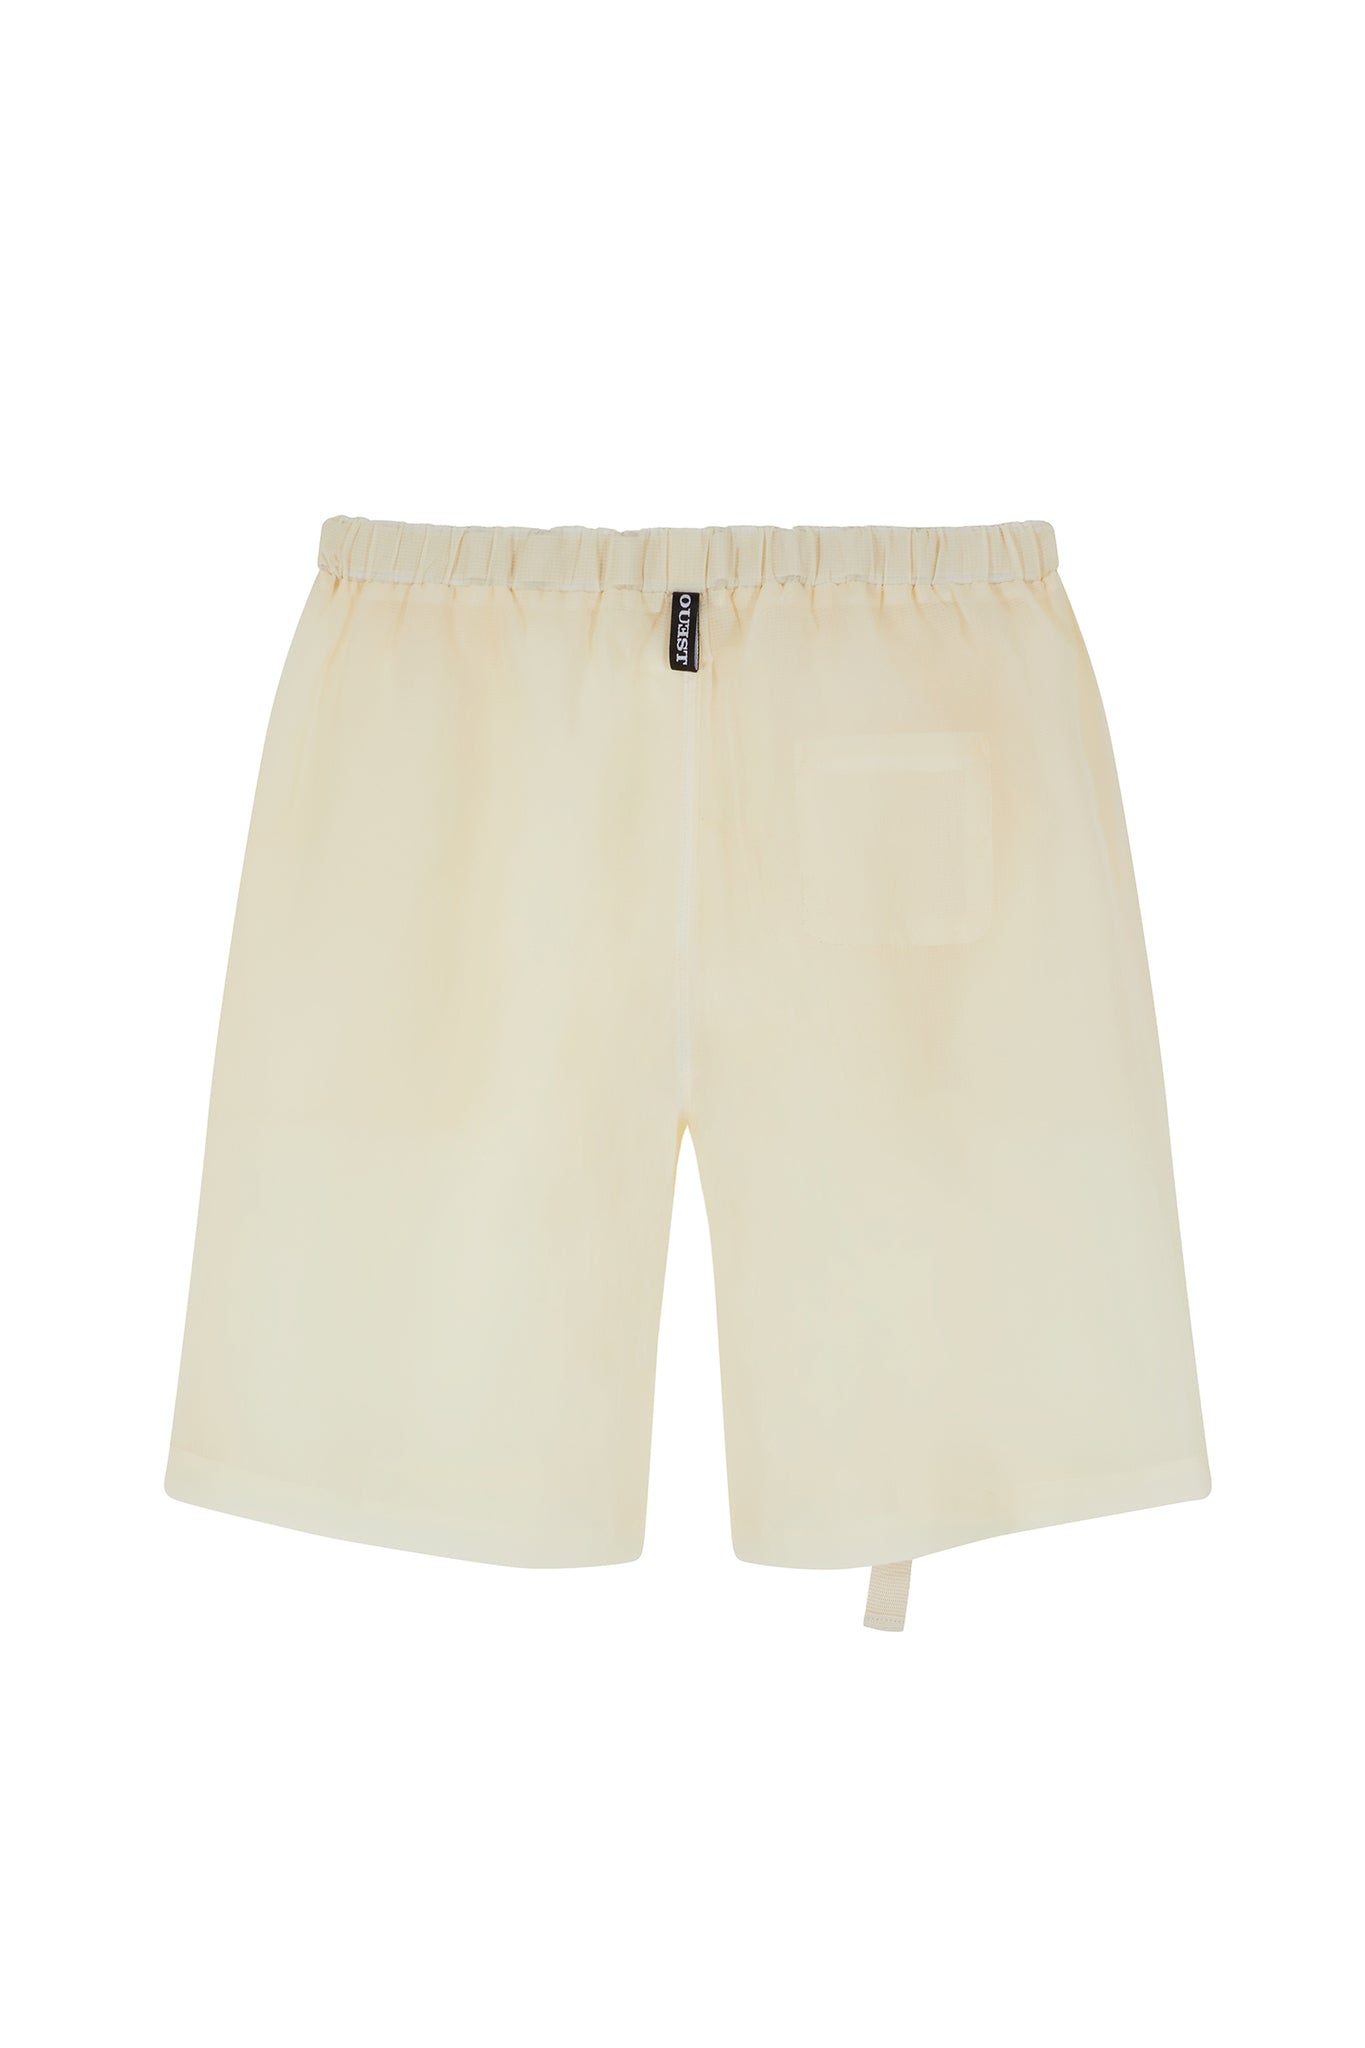 THE CLIMBING SHORTS IN OFF-WHITE